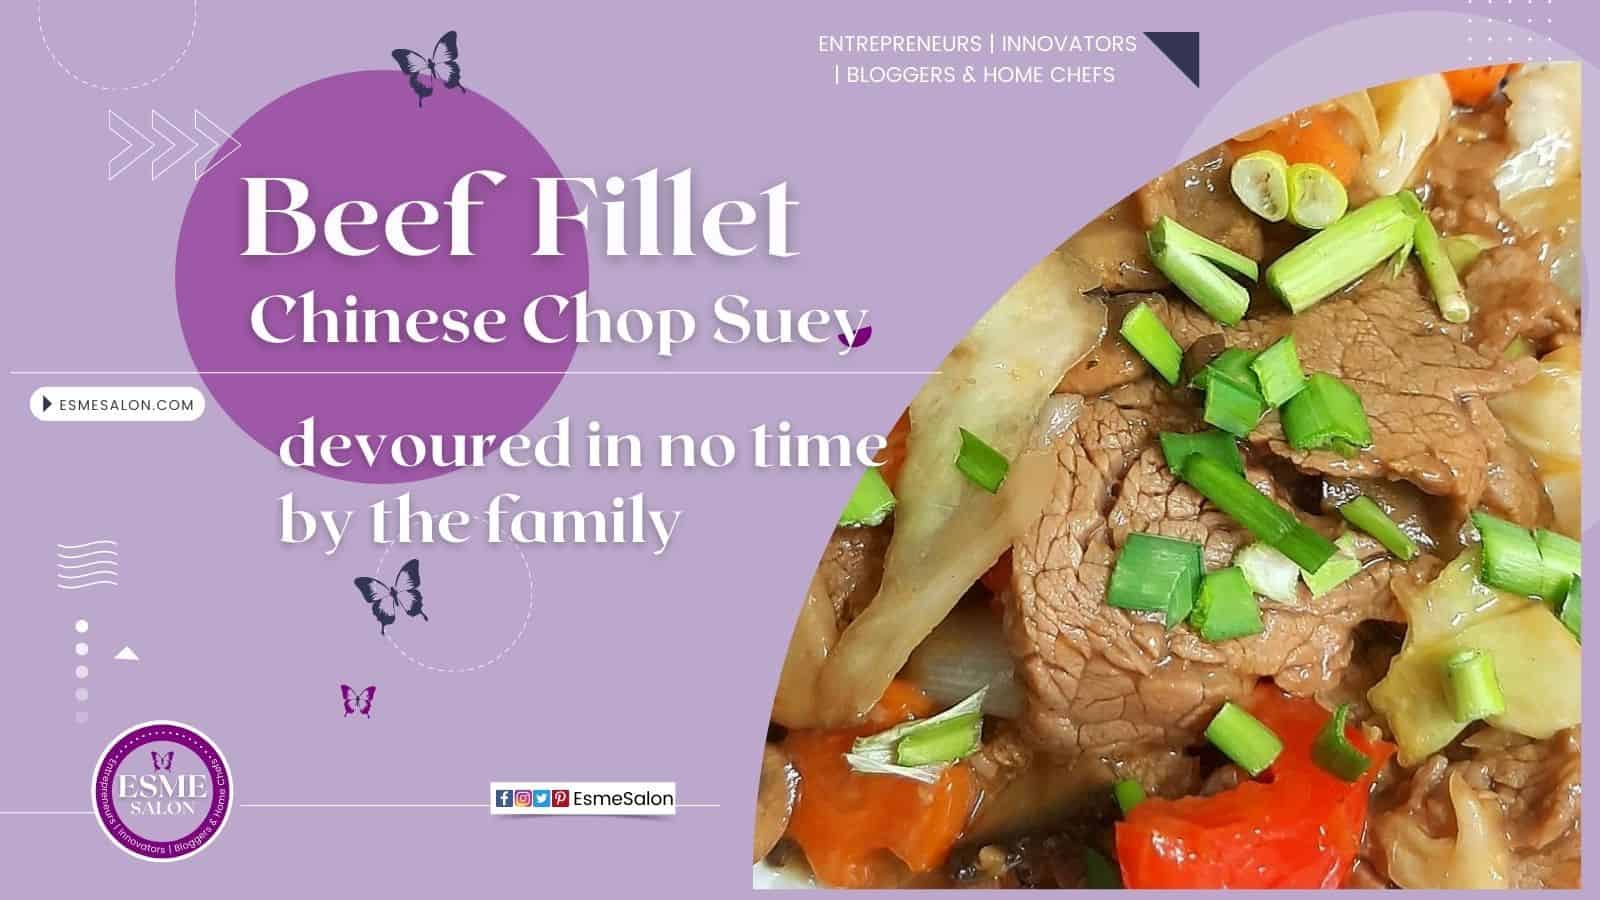 Plated Chop Suey Chinese Beef Fillet with green onions and veggies